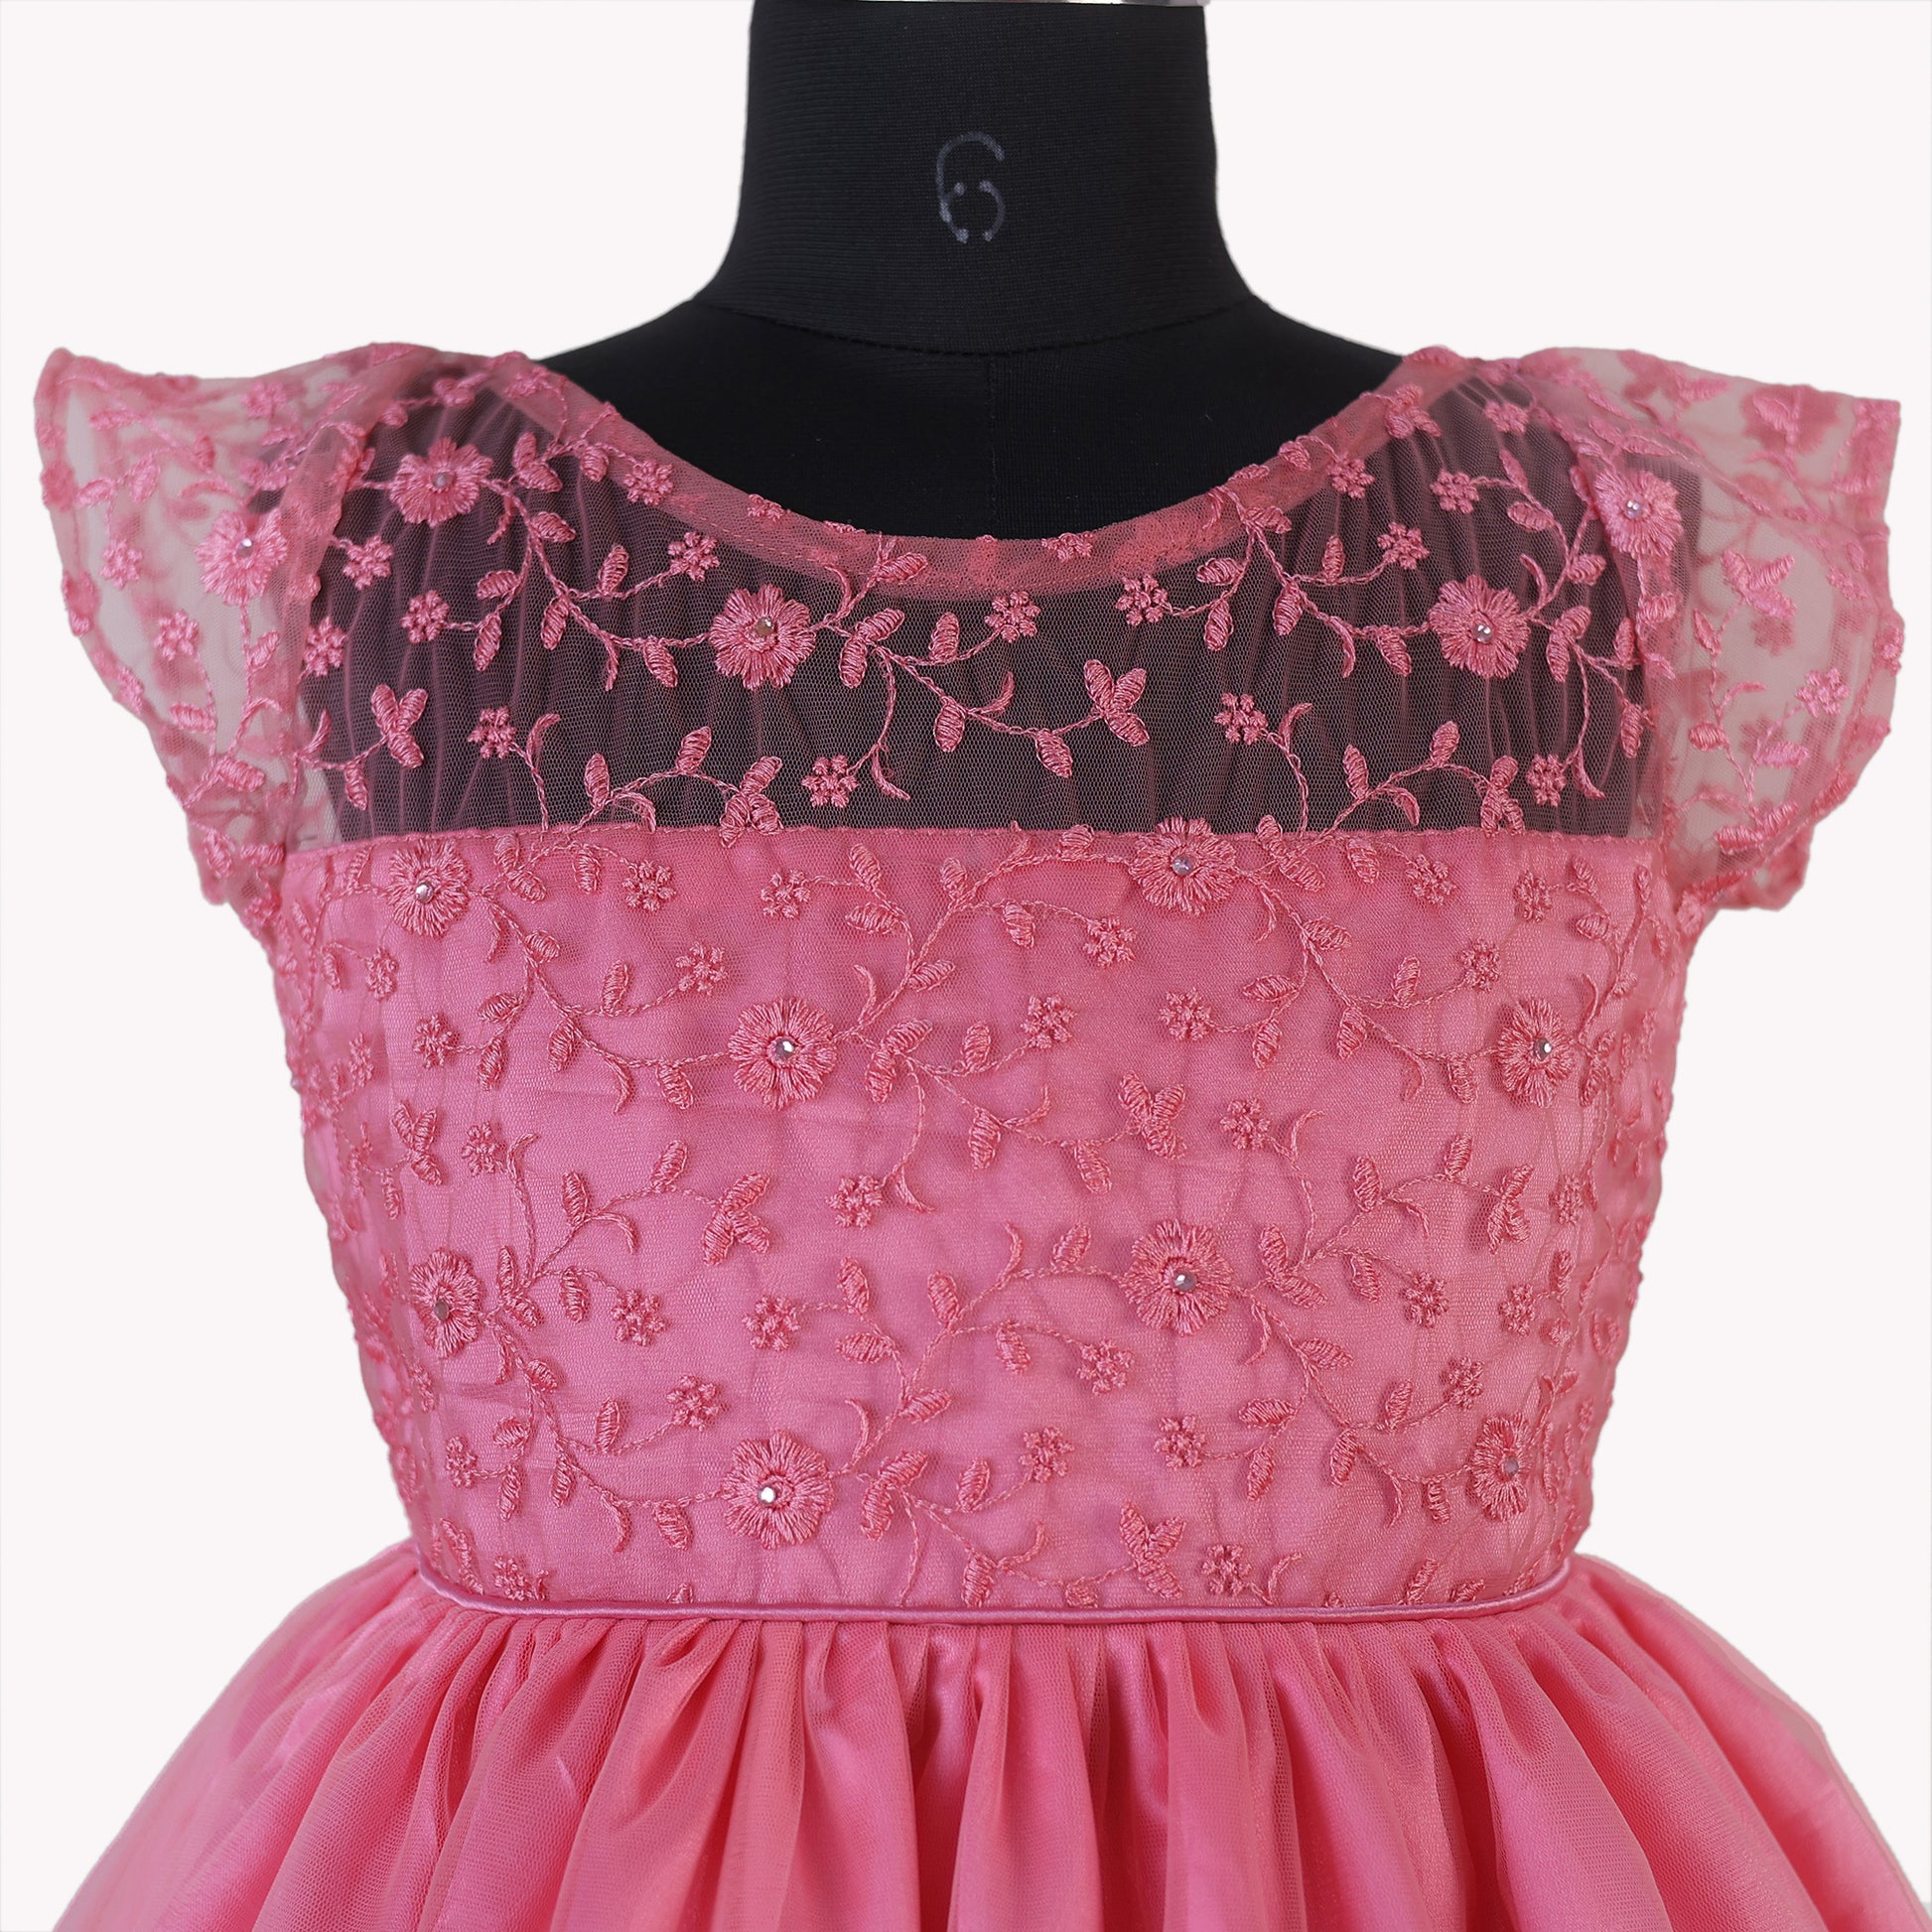 HEYKIDOO latest designer kids girls stylish comfortable party frock 2023 Knee length birthday frock dress floral embroidered satin elegant pink fashionable 7-year best quality unique gown flower dress